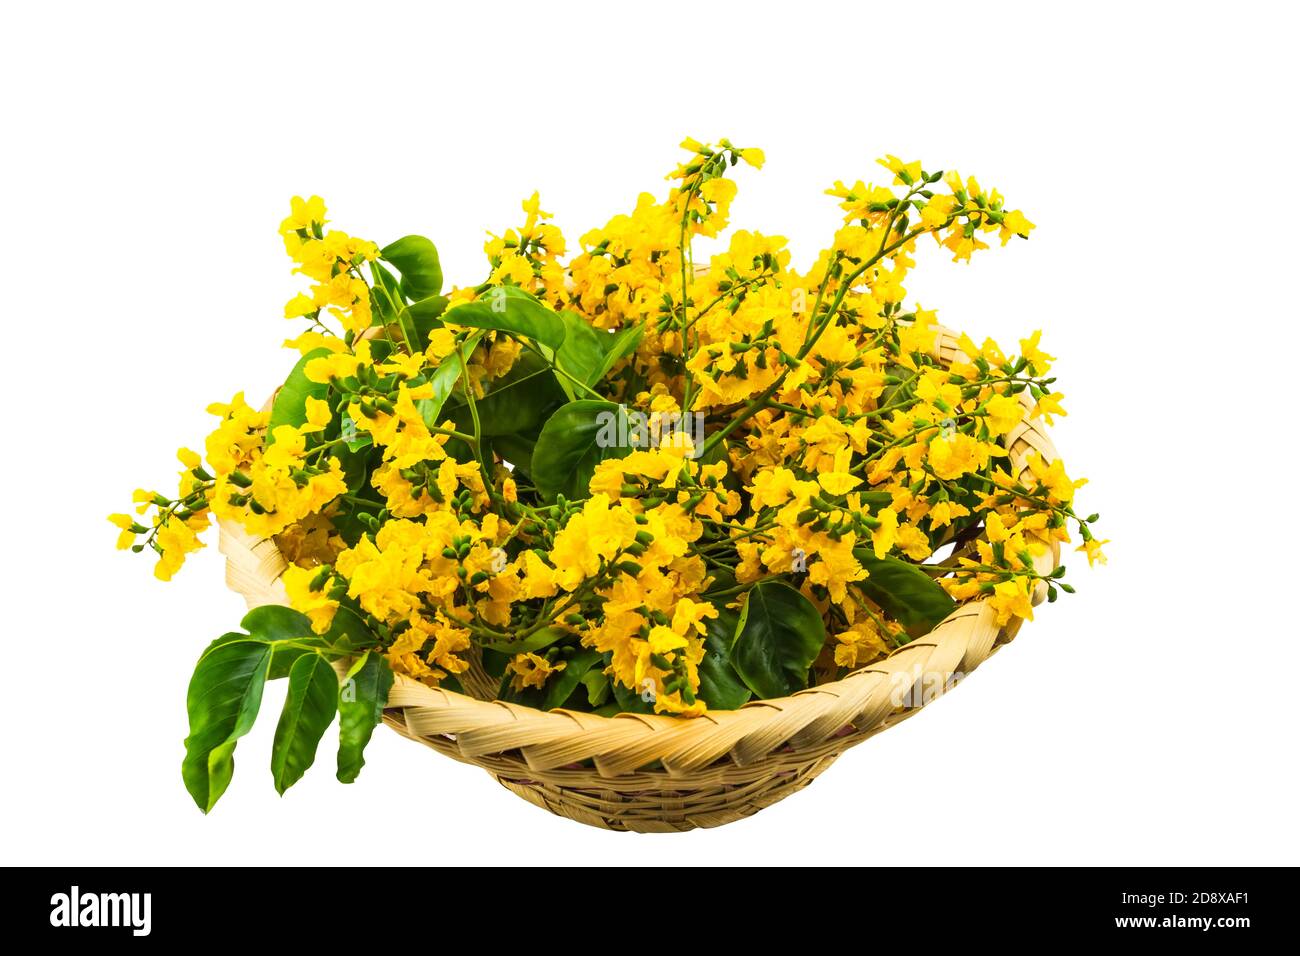 Closed up yellow flower of Burmese Rosewood or Pterocarpus indicus Willd,Burma Padauk and green leaf in bamboo basket isolated on white background.Sav Stock Photo